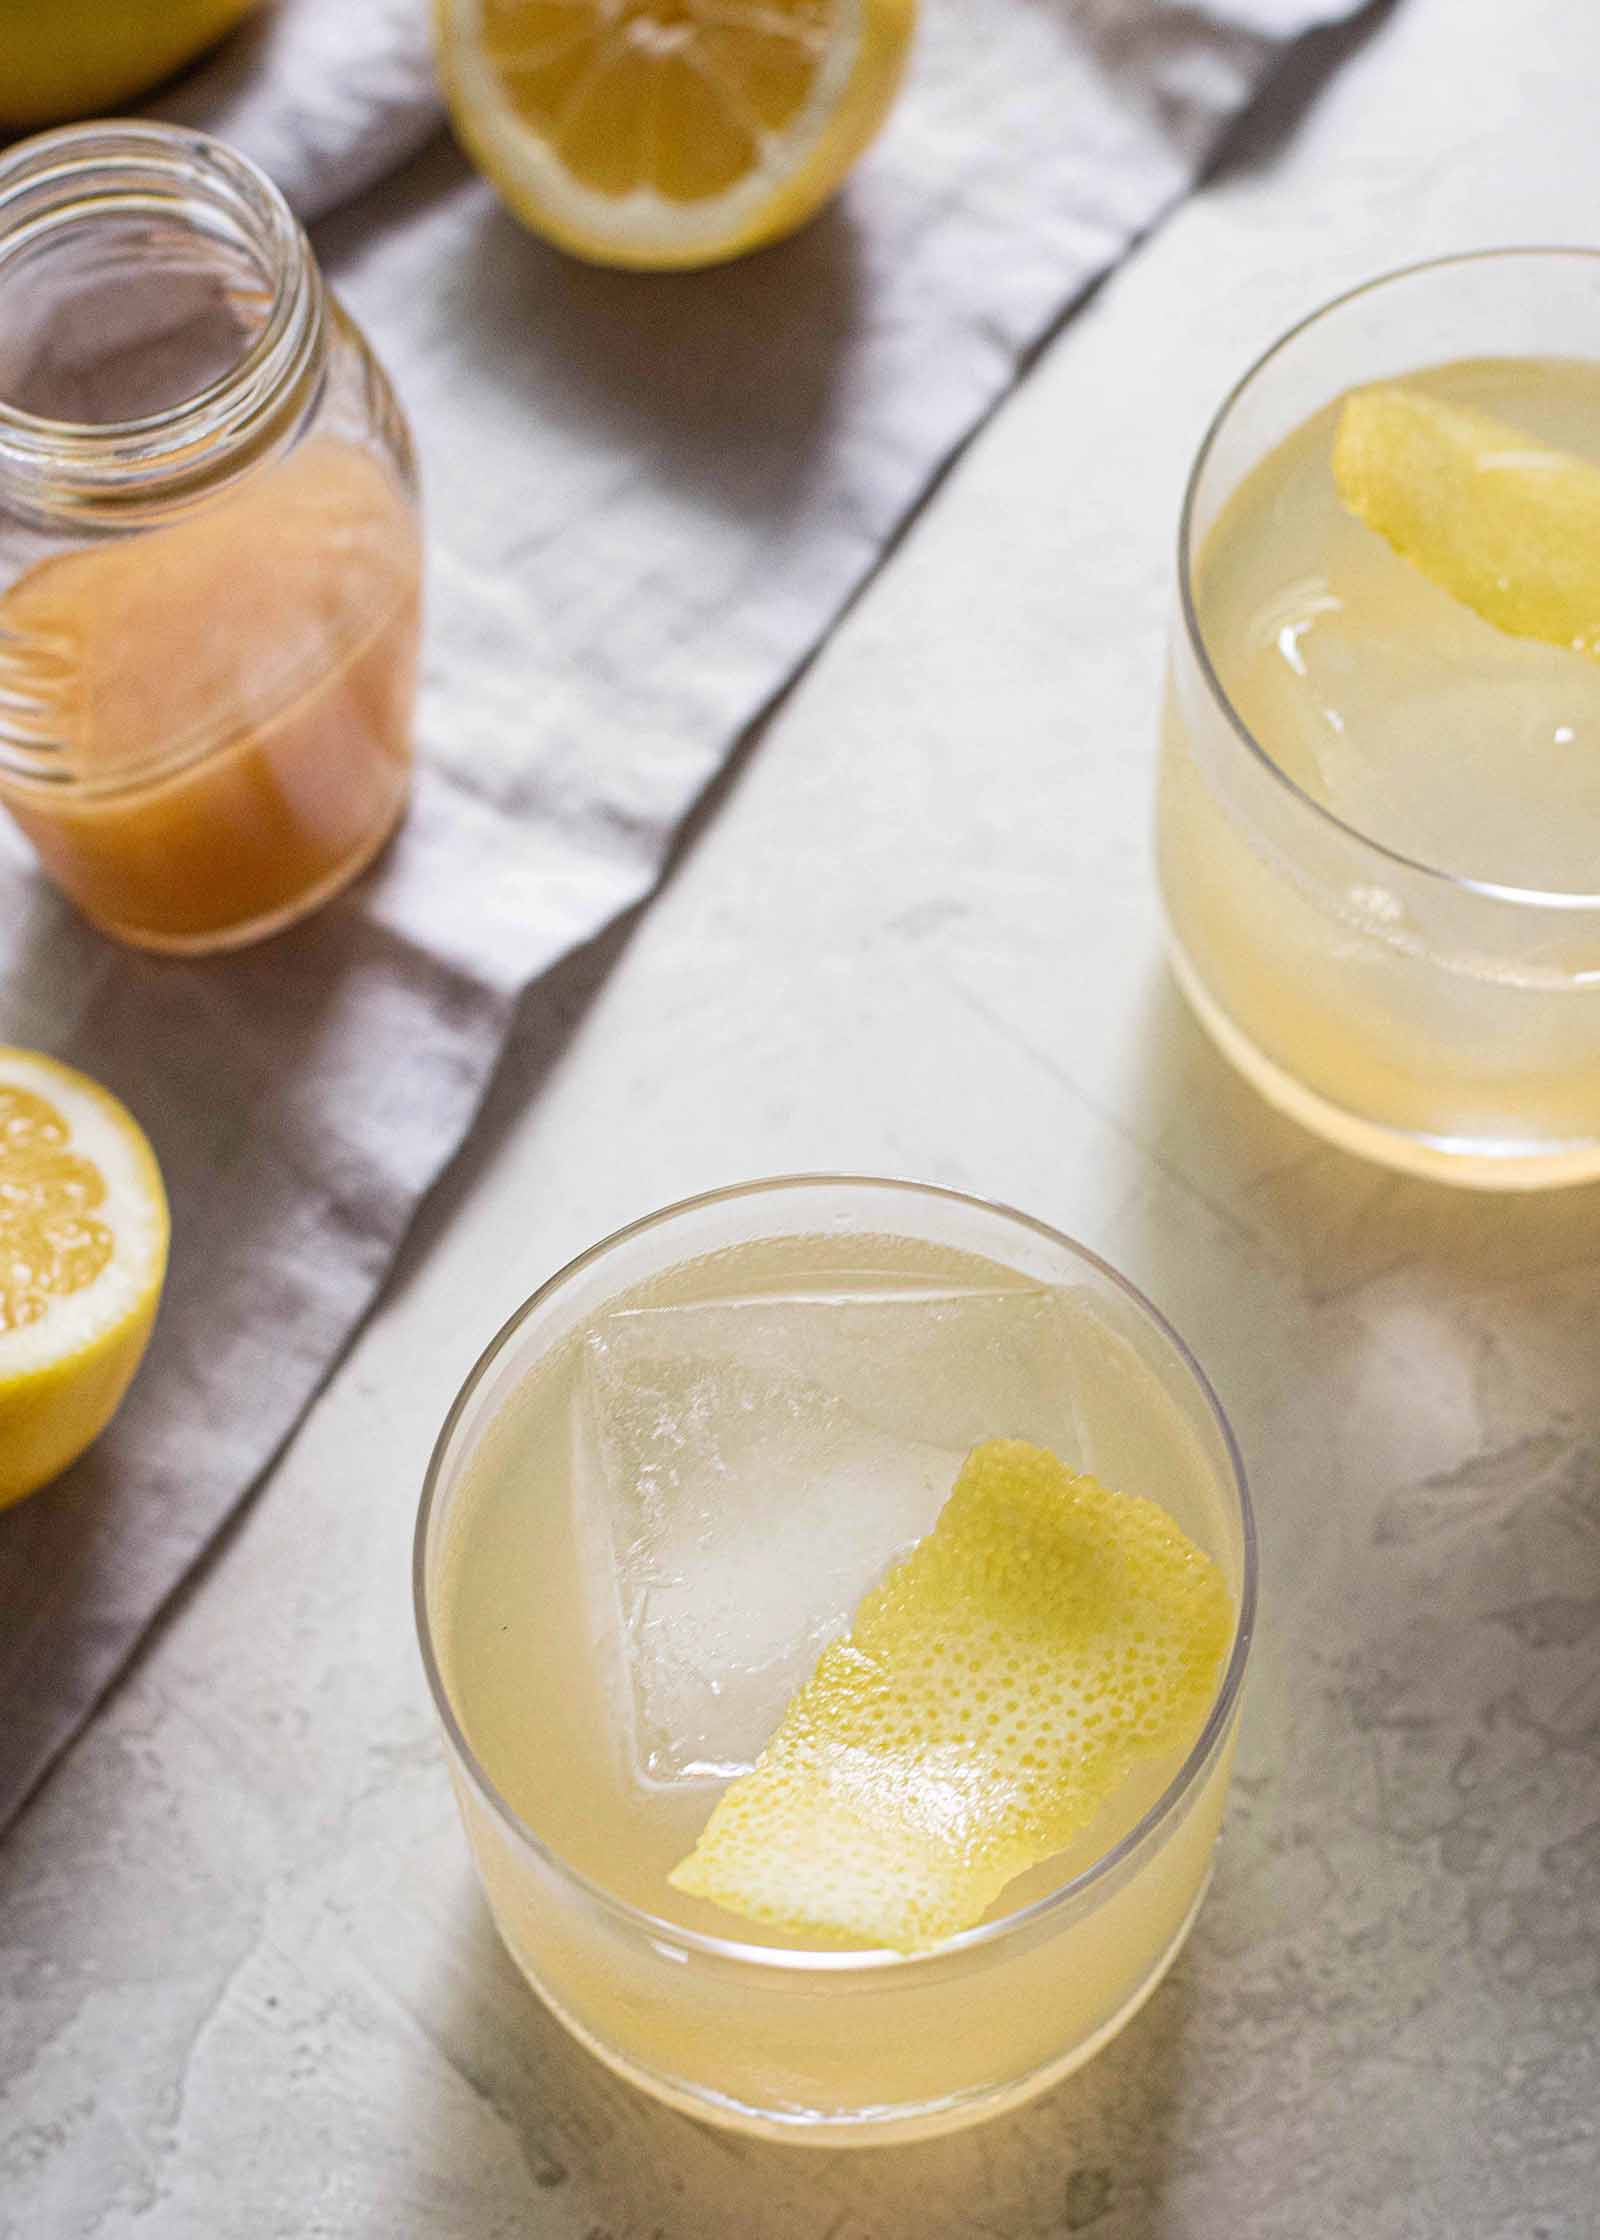 Bee's Knees cocktail drink recipe with honey, gin, and lemon